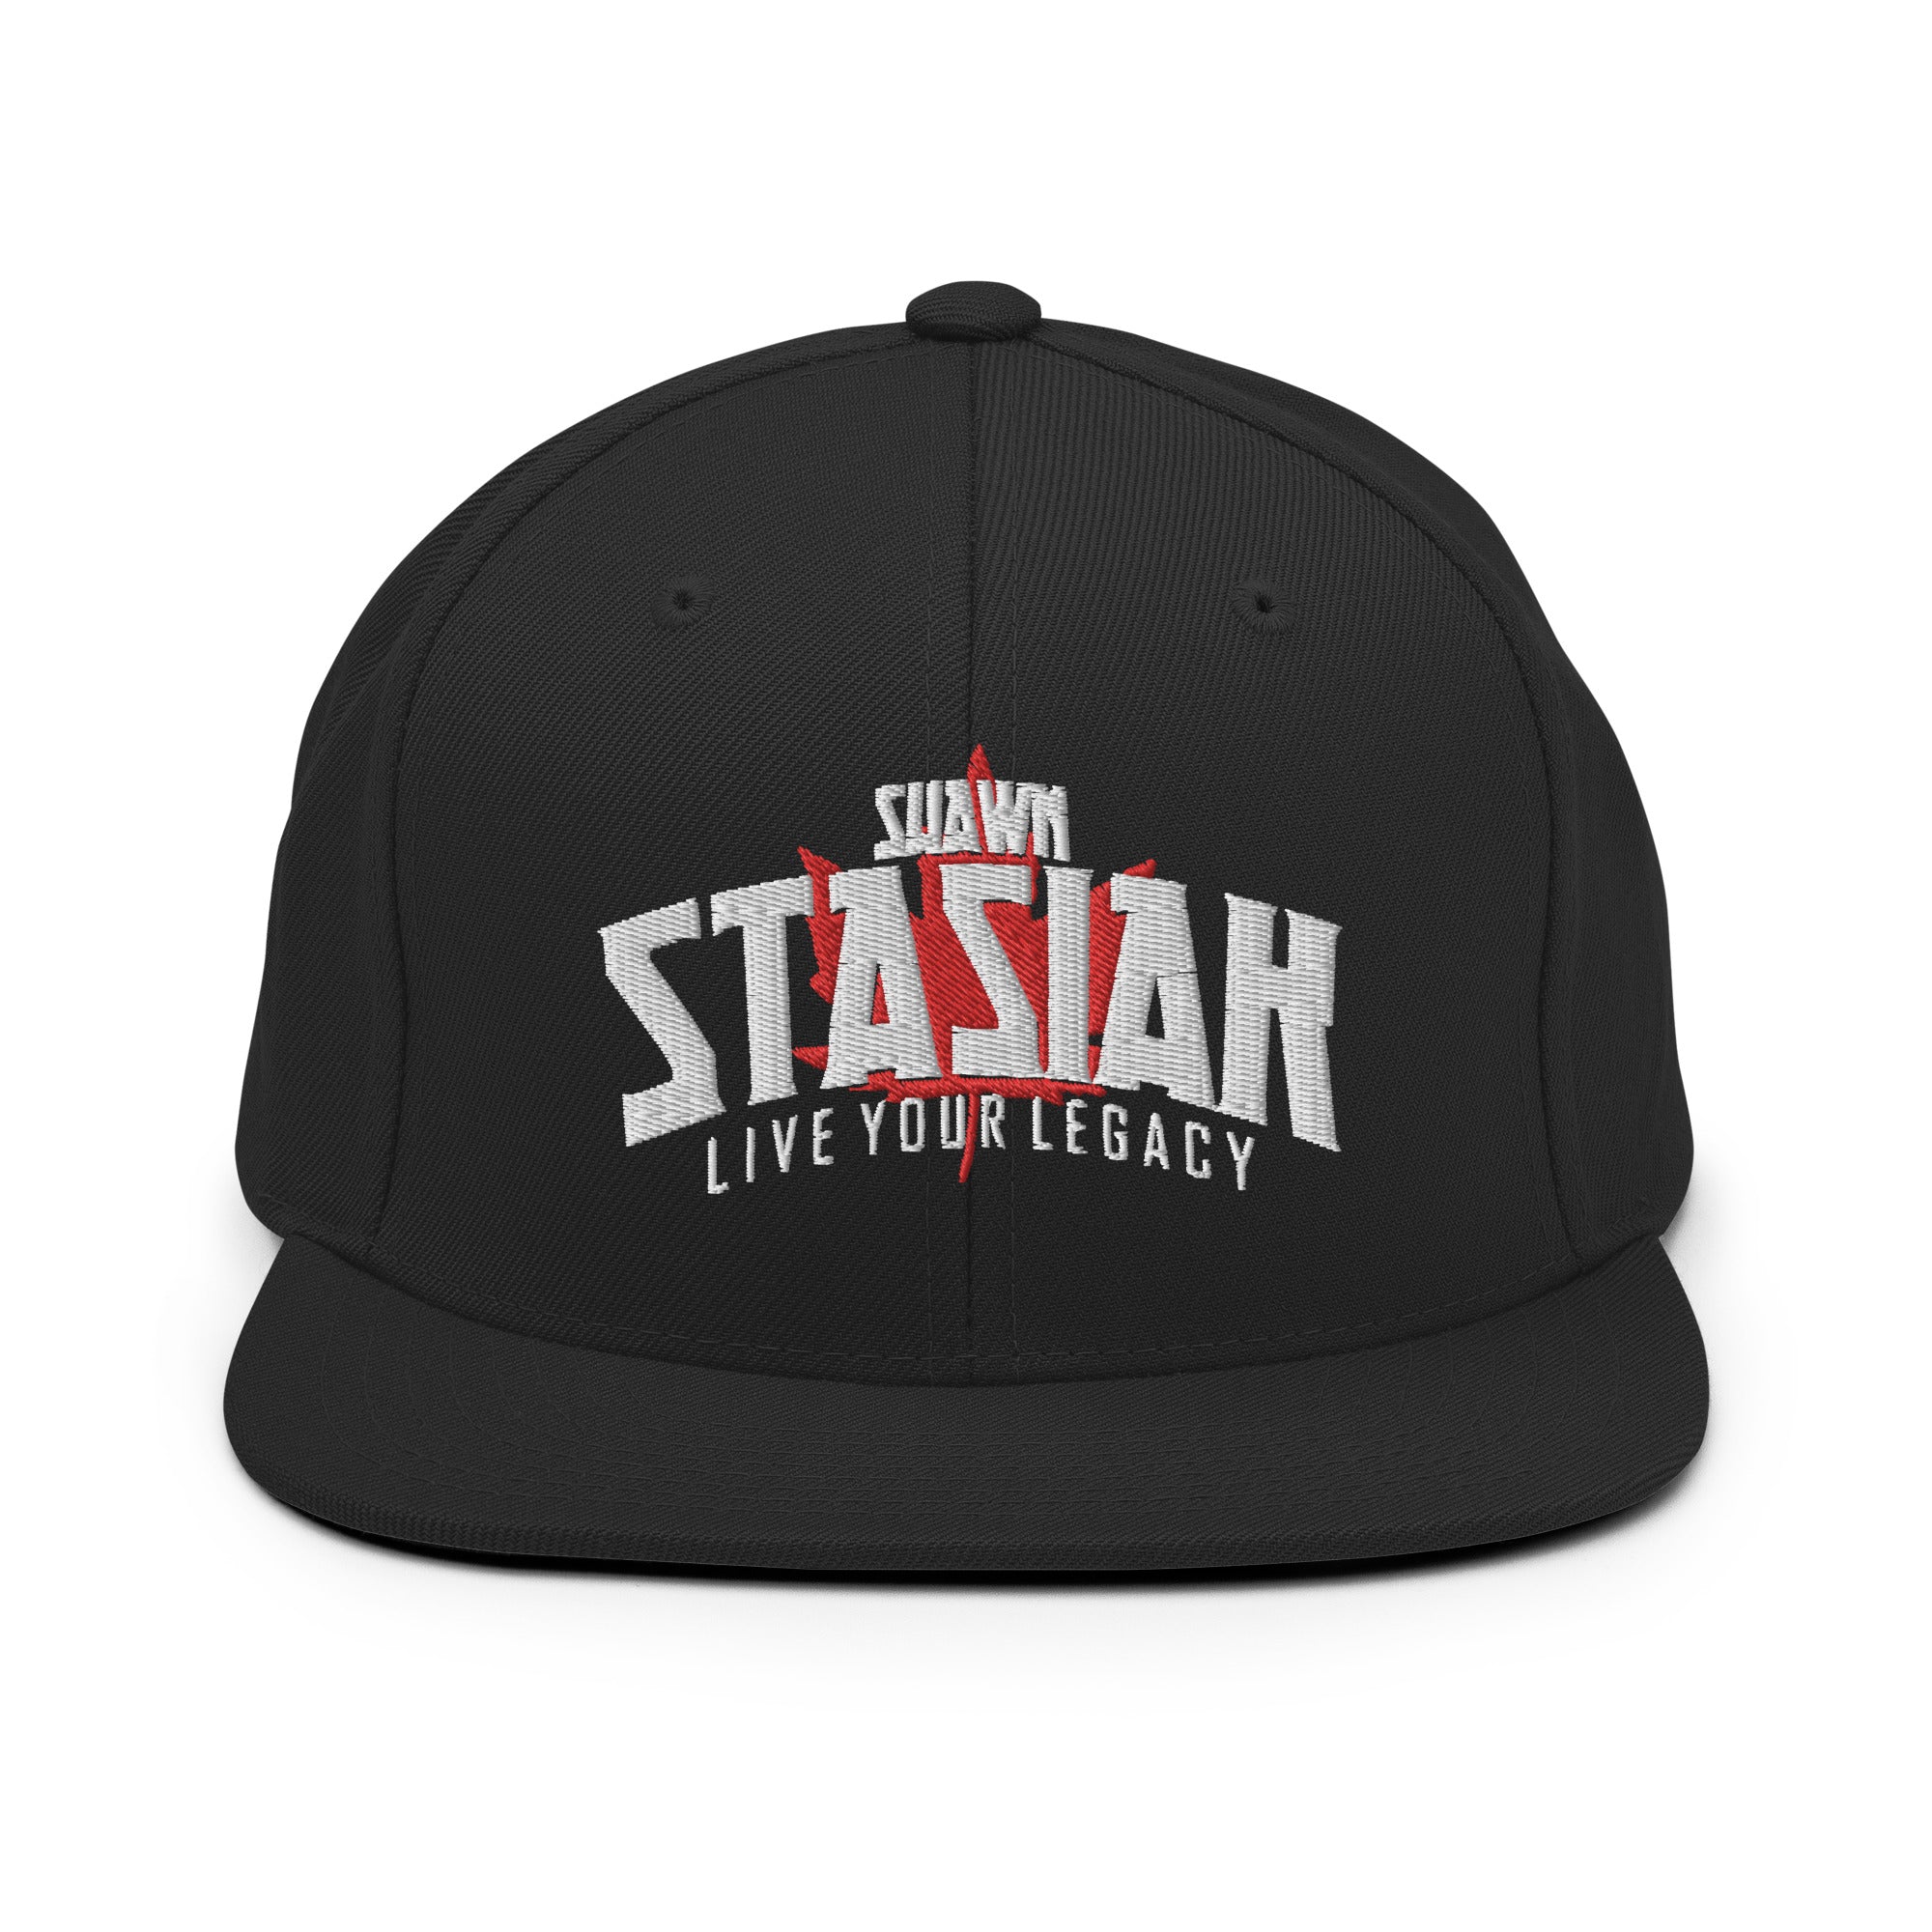 Shawn Stasiak "Live Your Legacy" Canadian Snapback Hat